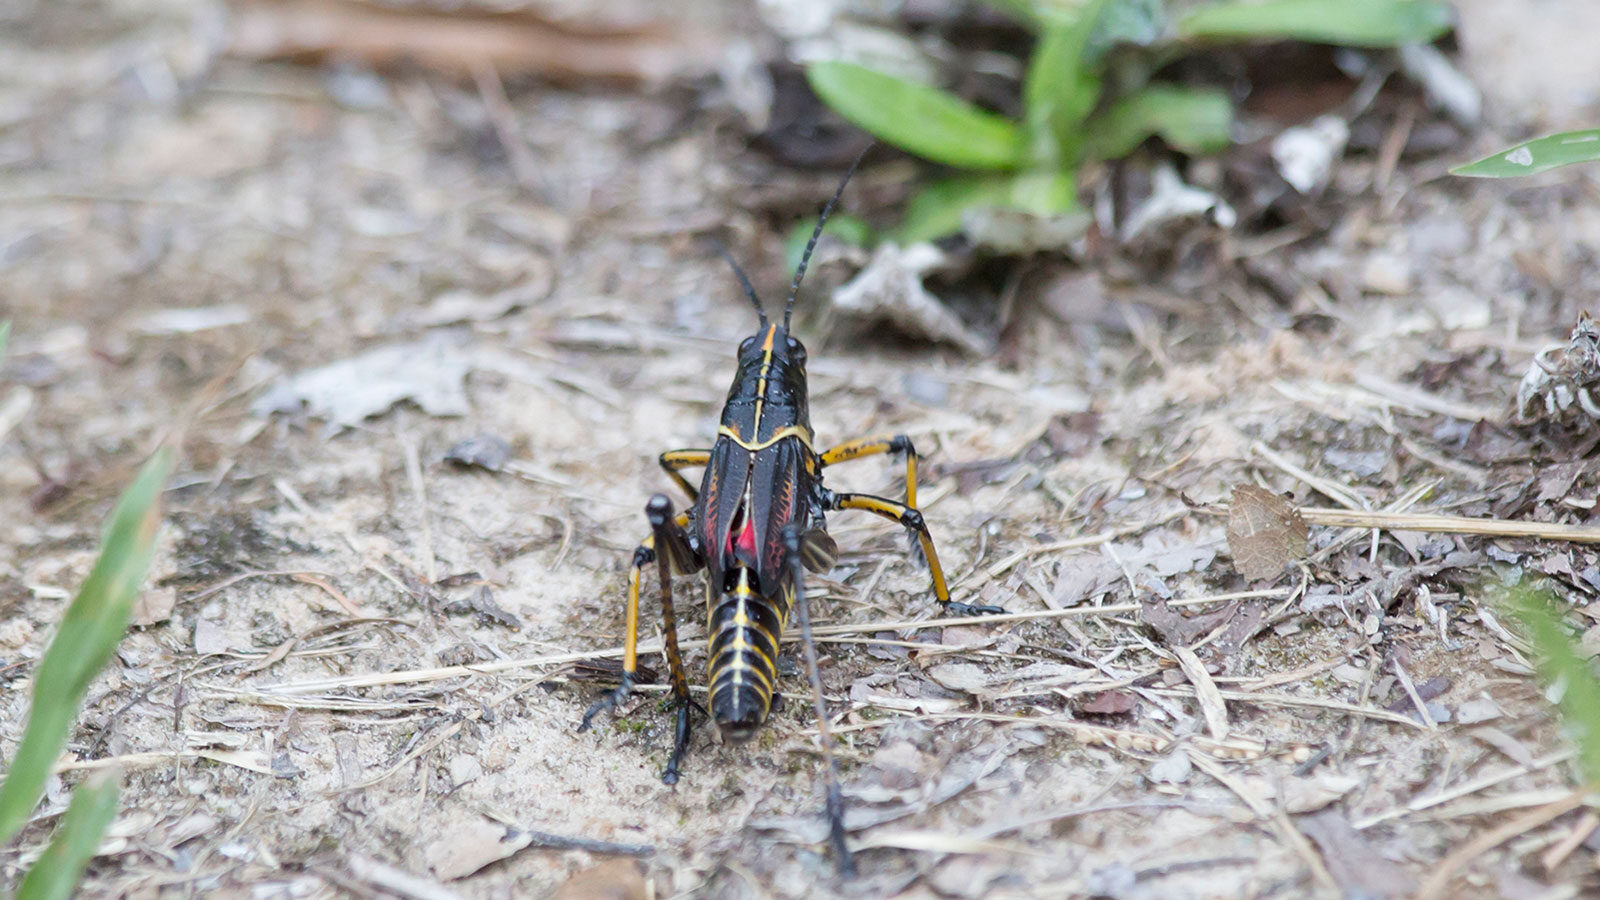 Young eastern lubber grasshopper on a patch of dirt